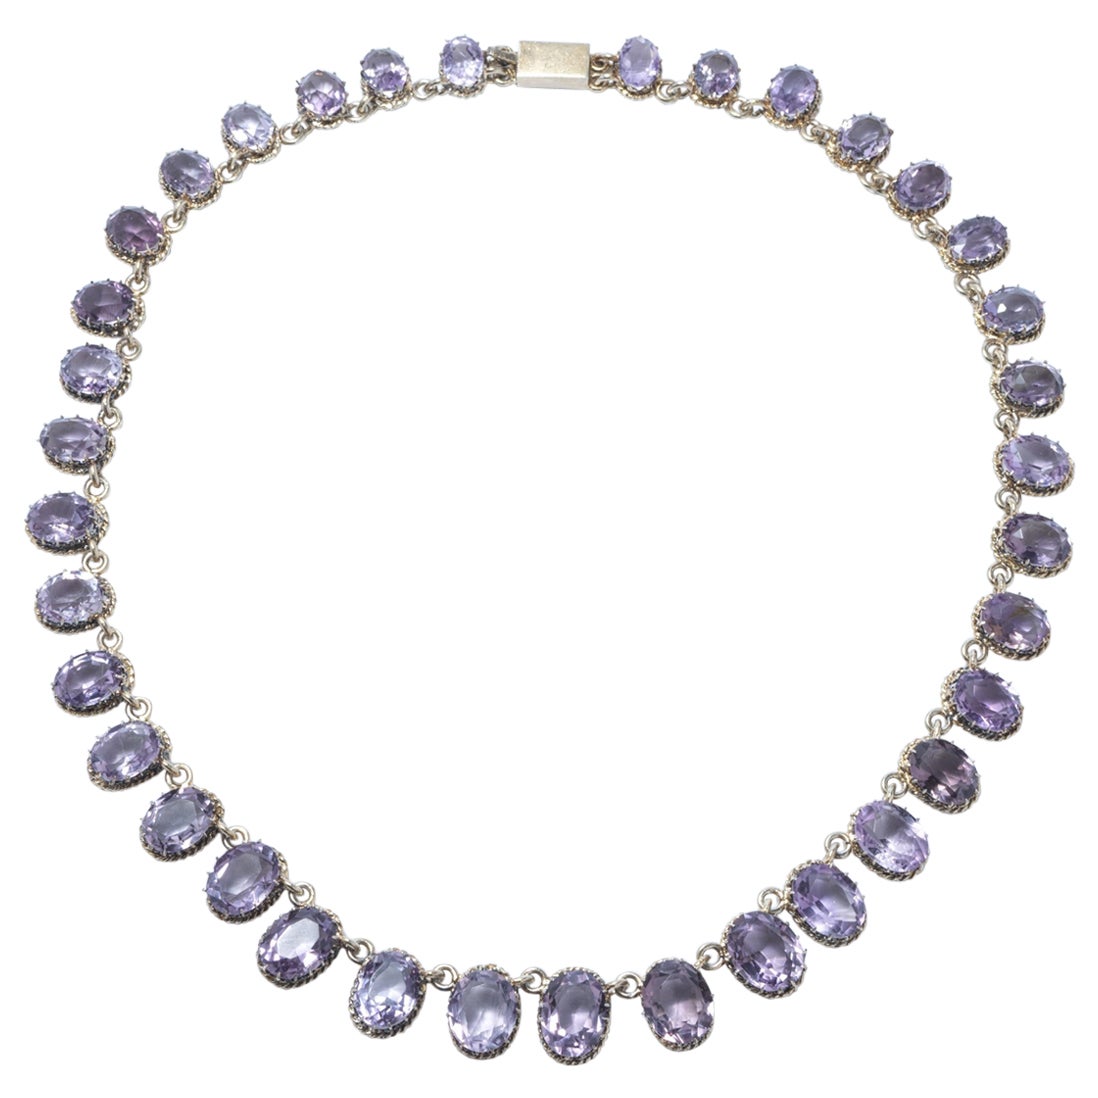 Antique necklace. Gilt silver with amethysts. 19th c